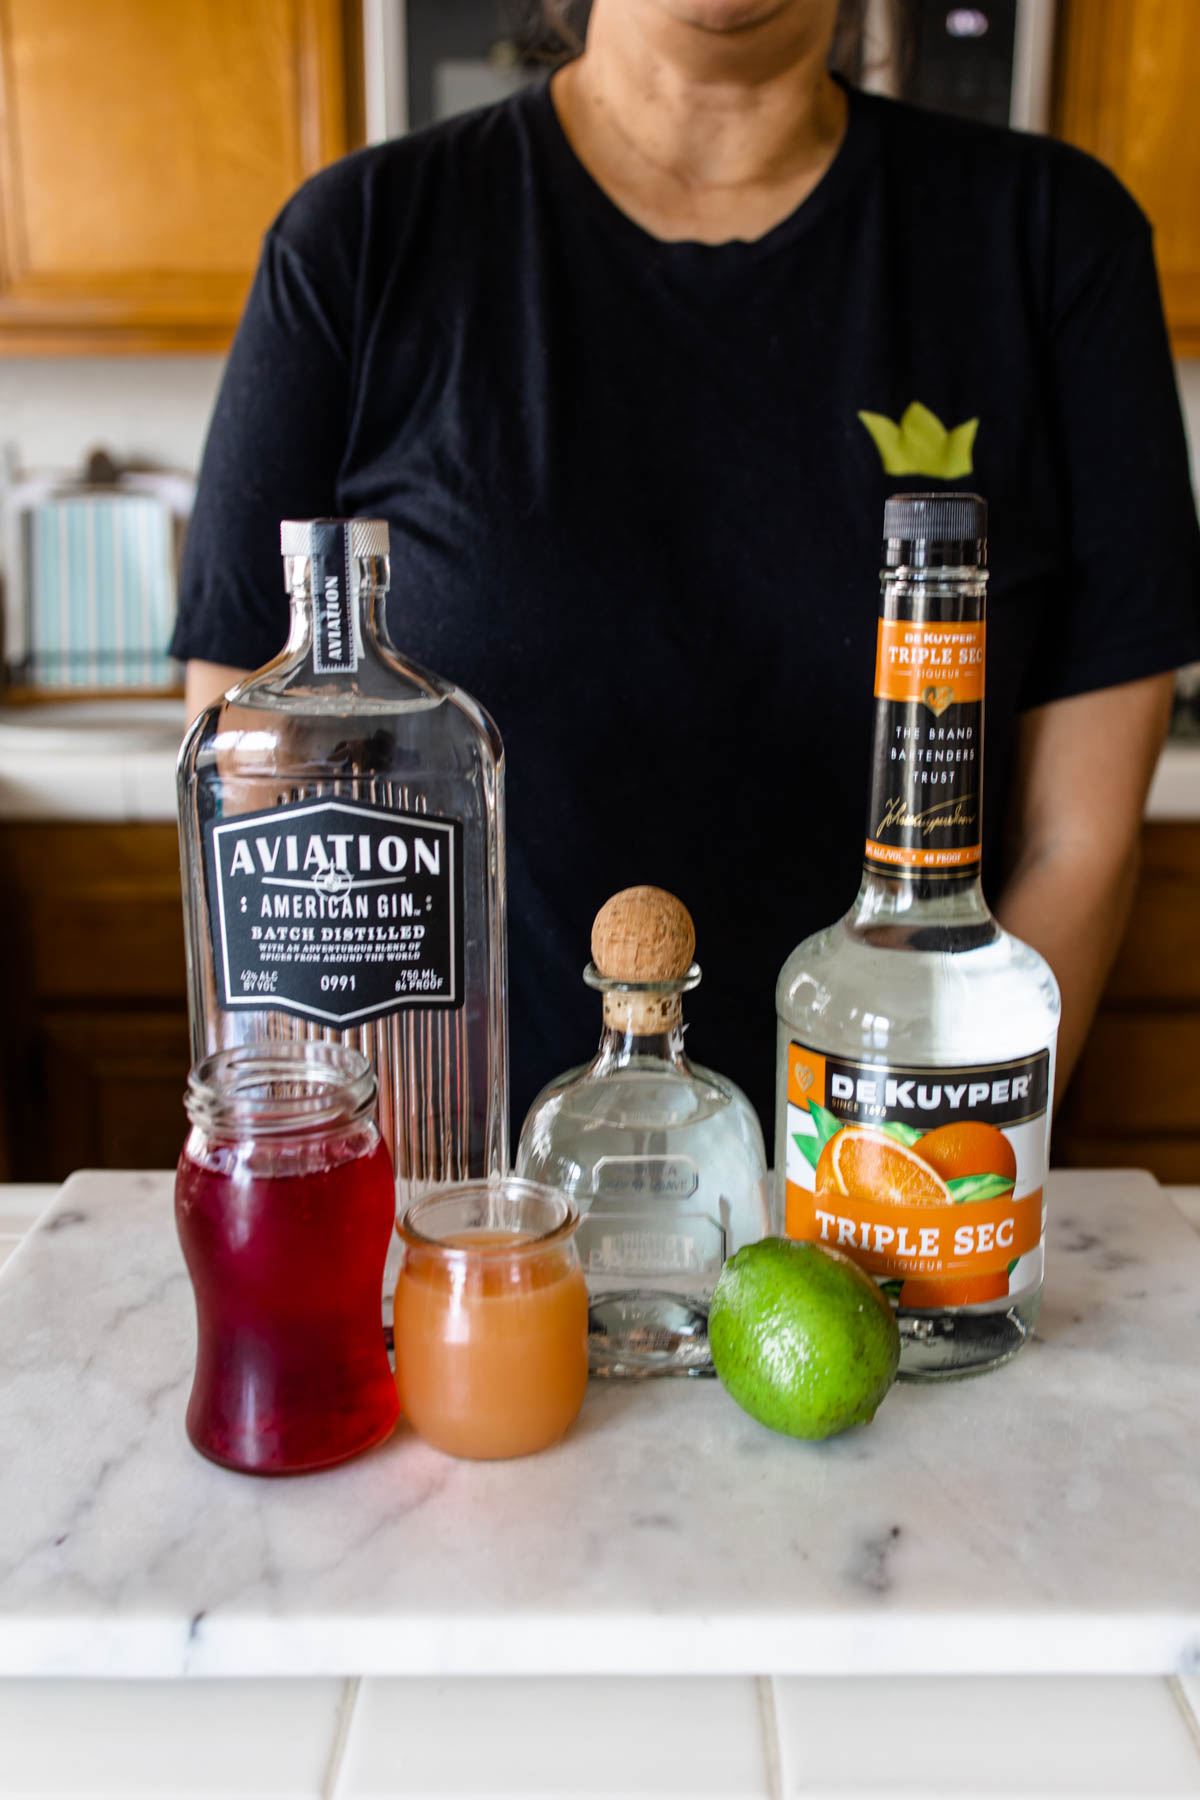 Bottles of Aviation Gin, Patron Silver tequila, and Triple Sec orange liqueur behind containers of cranberry and grapefruit juice and a fresh lime on top of a counter.